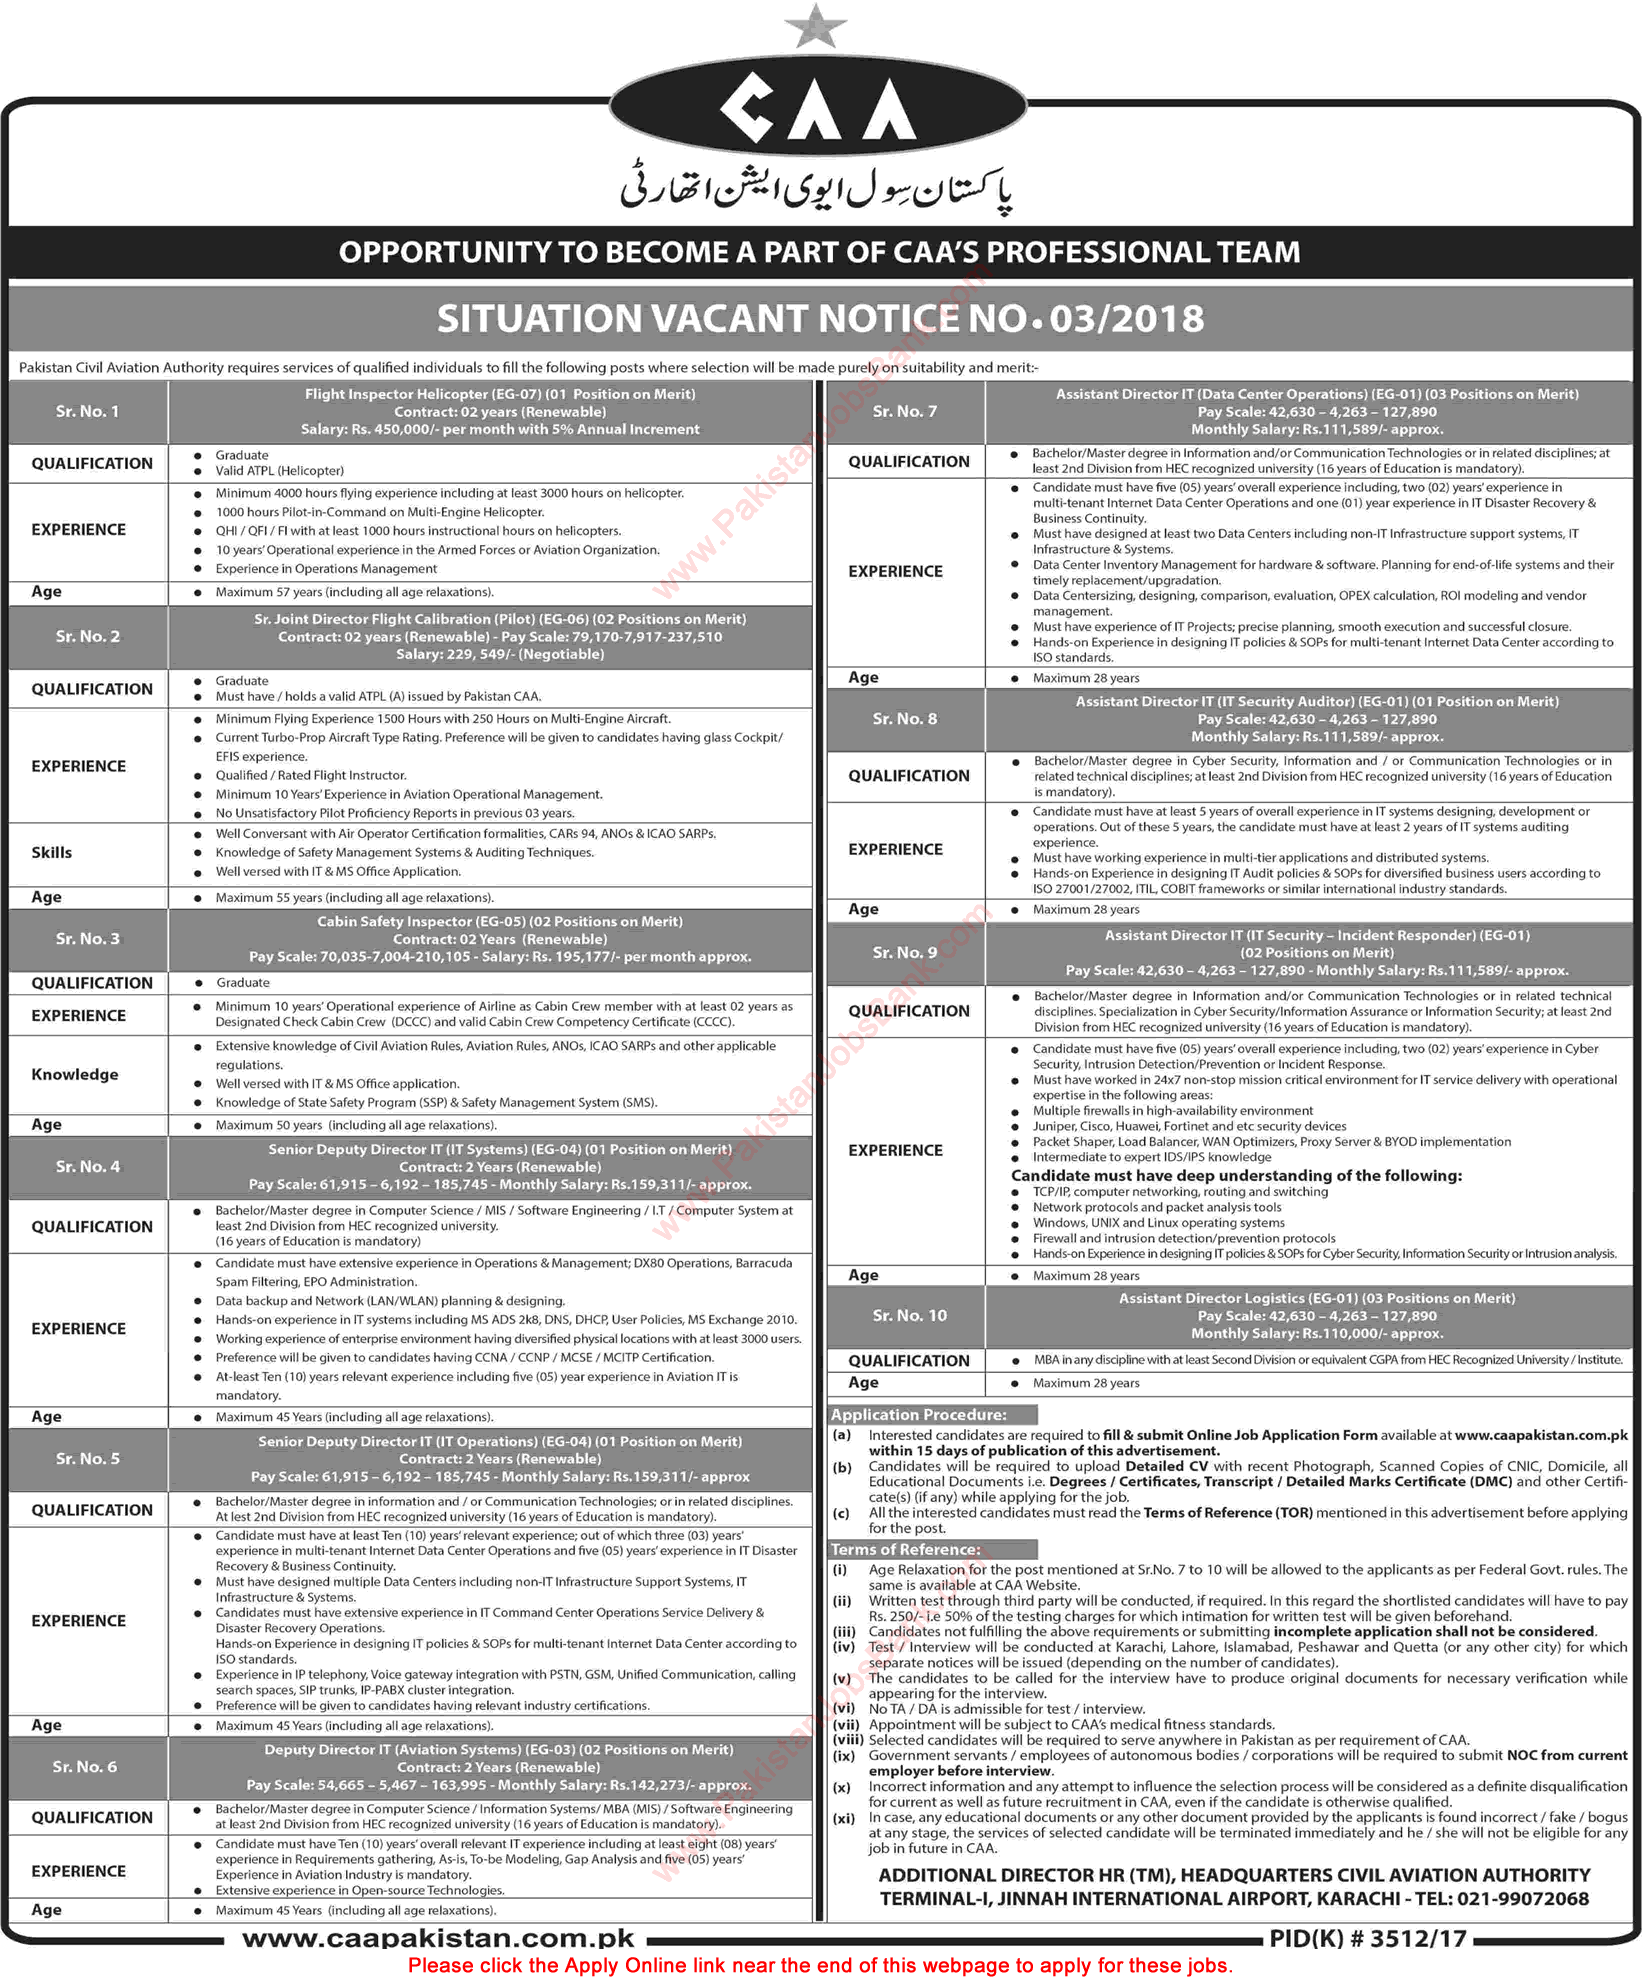 Civil Aviation Authority Pakistan Jobs 2018 March Apply Online Cabin Safety Inspectors & Others Latest